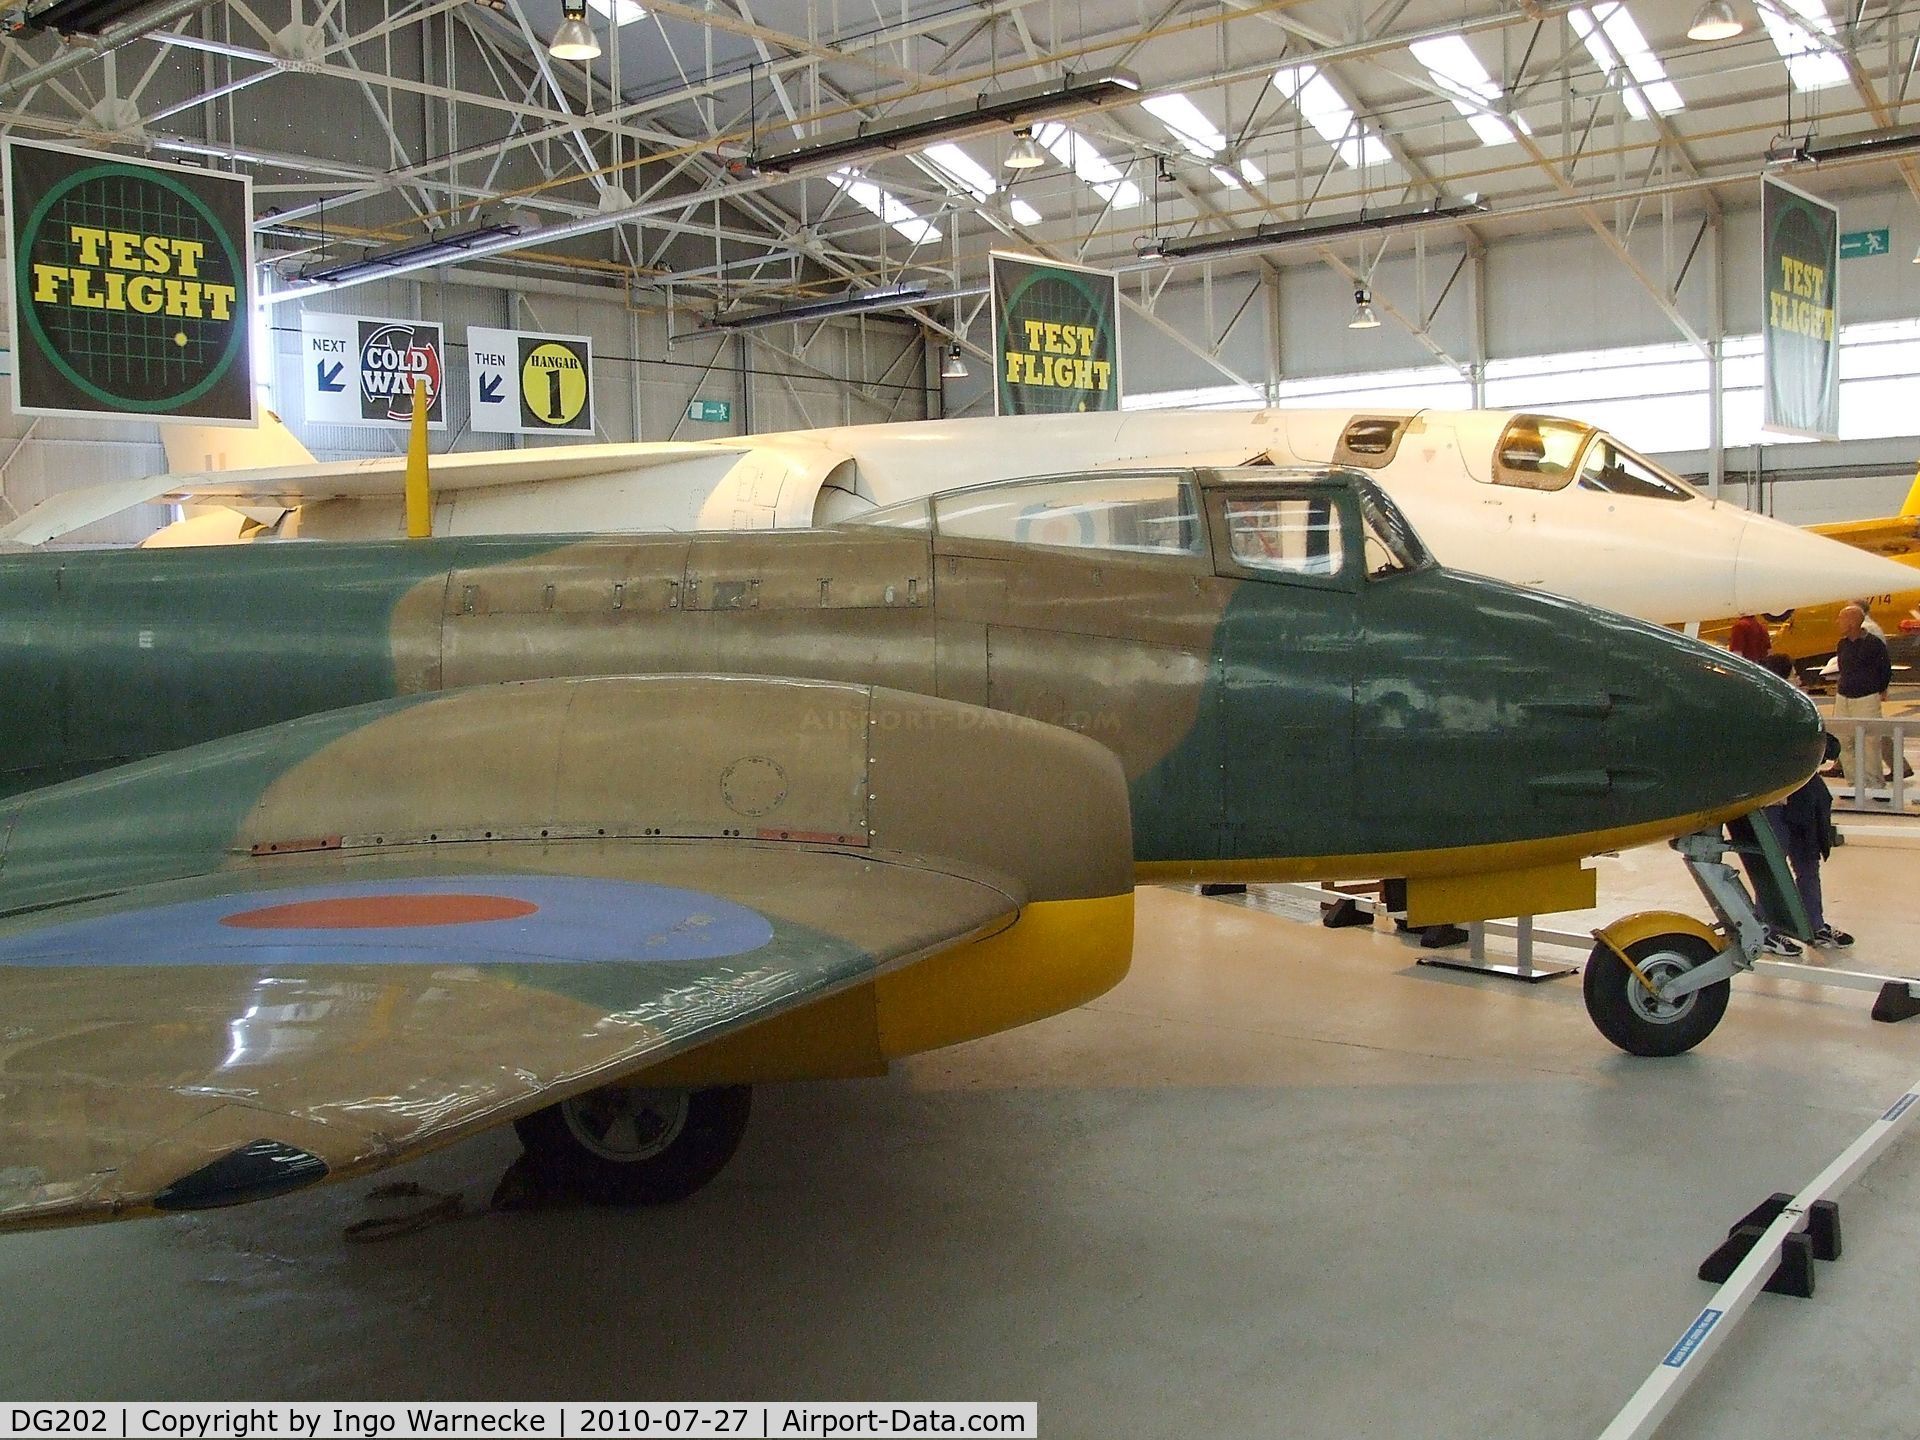 DG202, Gloster Meteor F.9/40 C/N Not found DG202, Gloster F.9/40 Meteor Prototype at the RAF Museum, Cosford